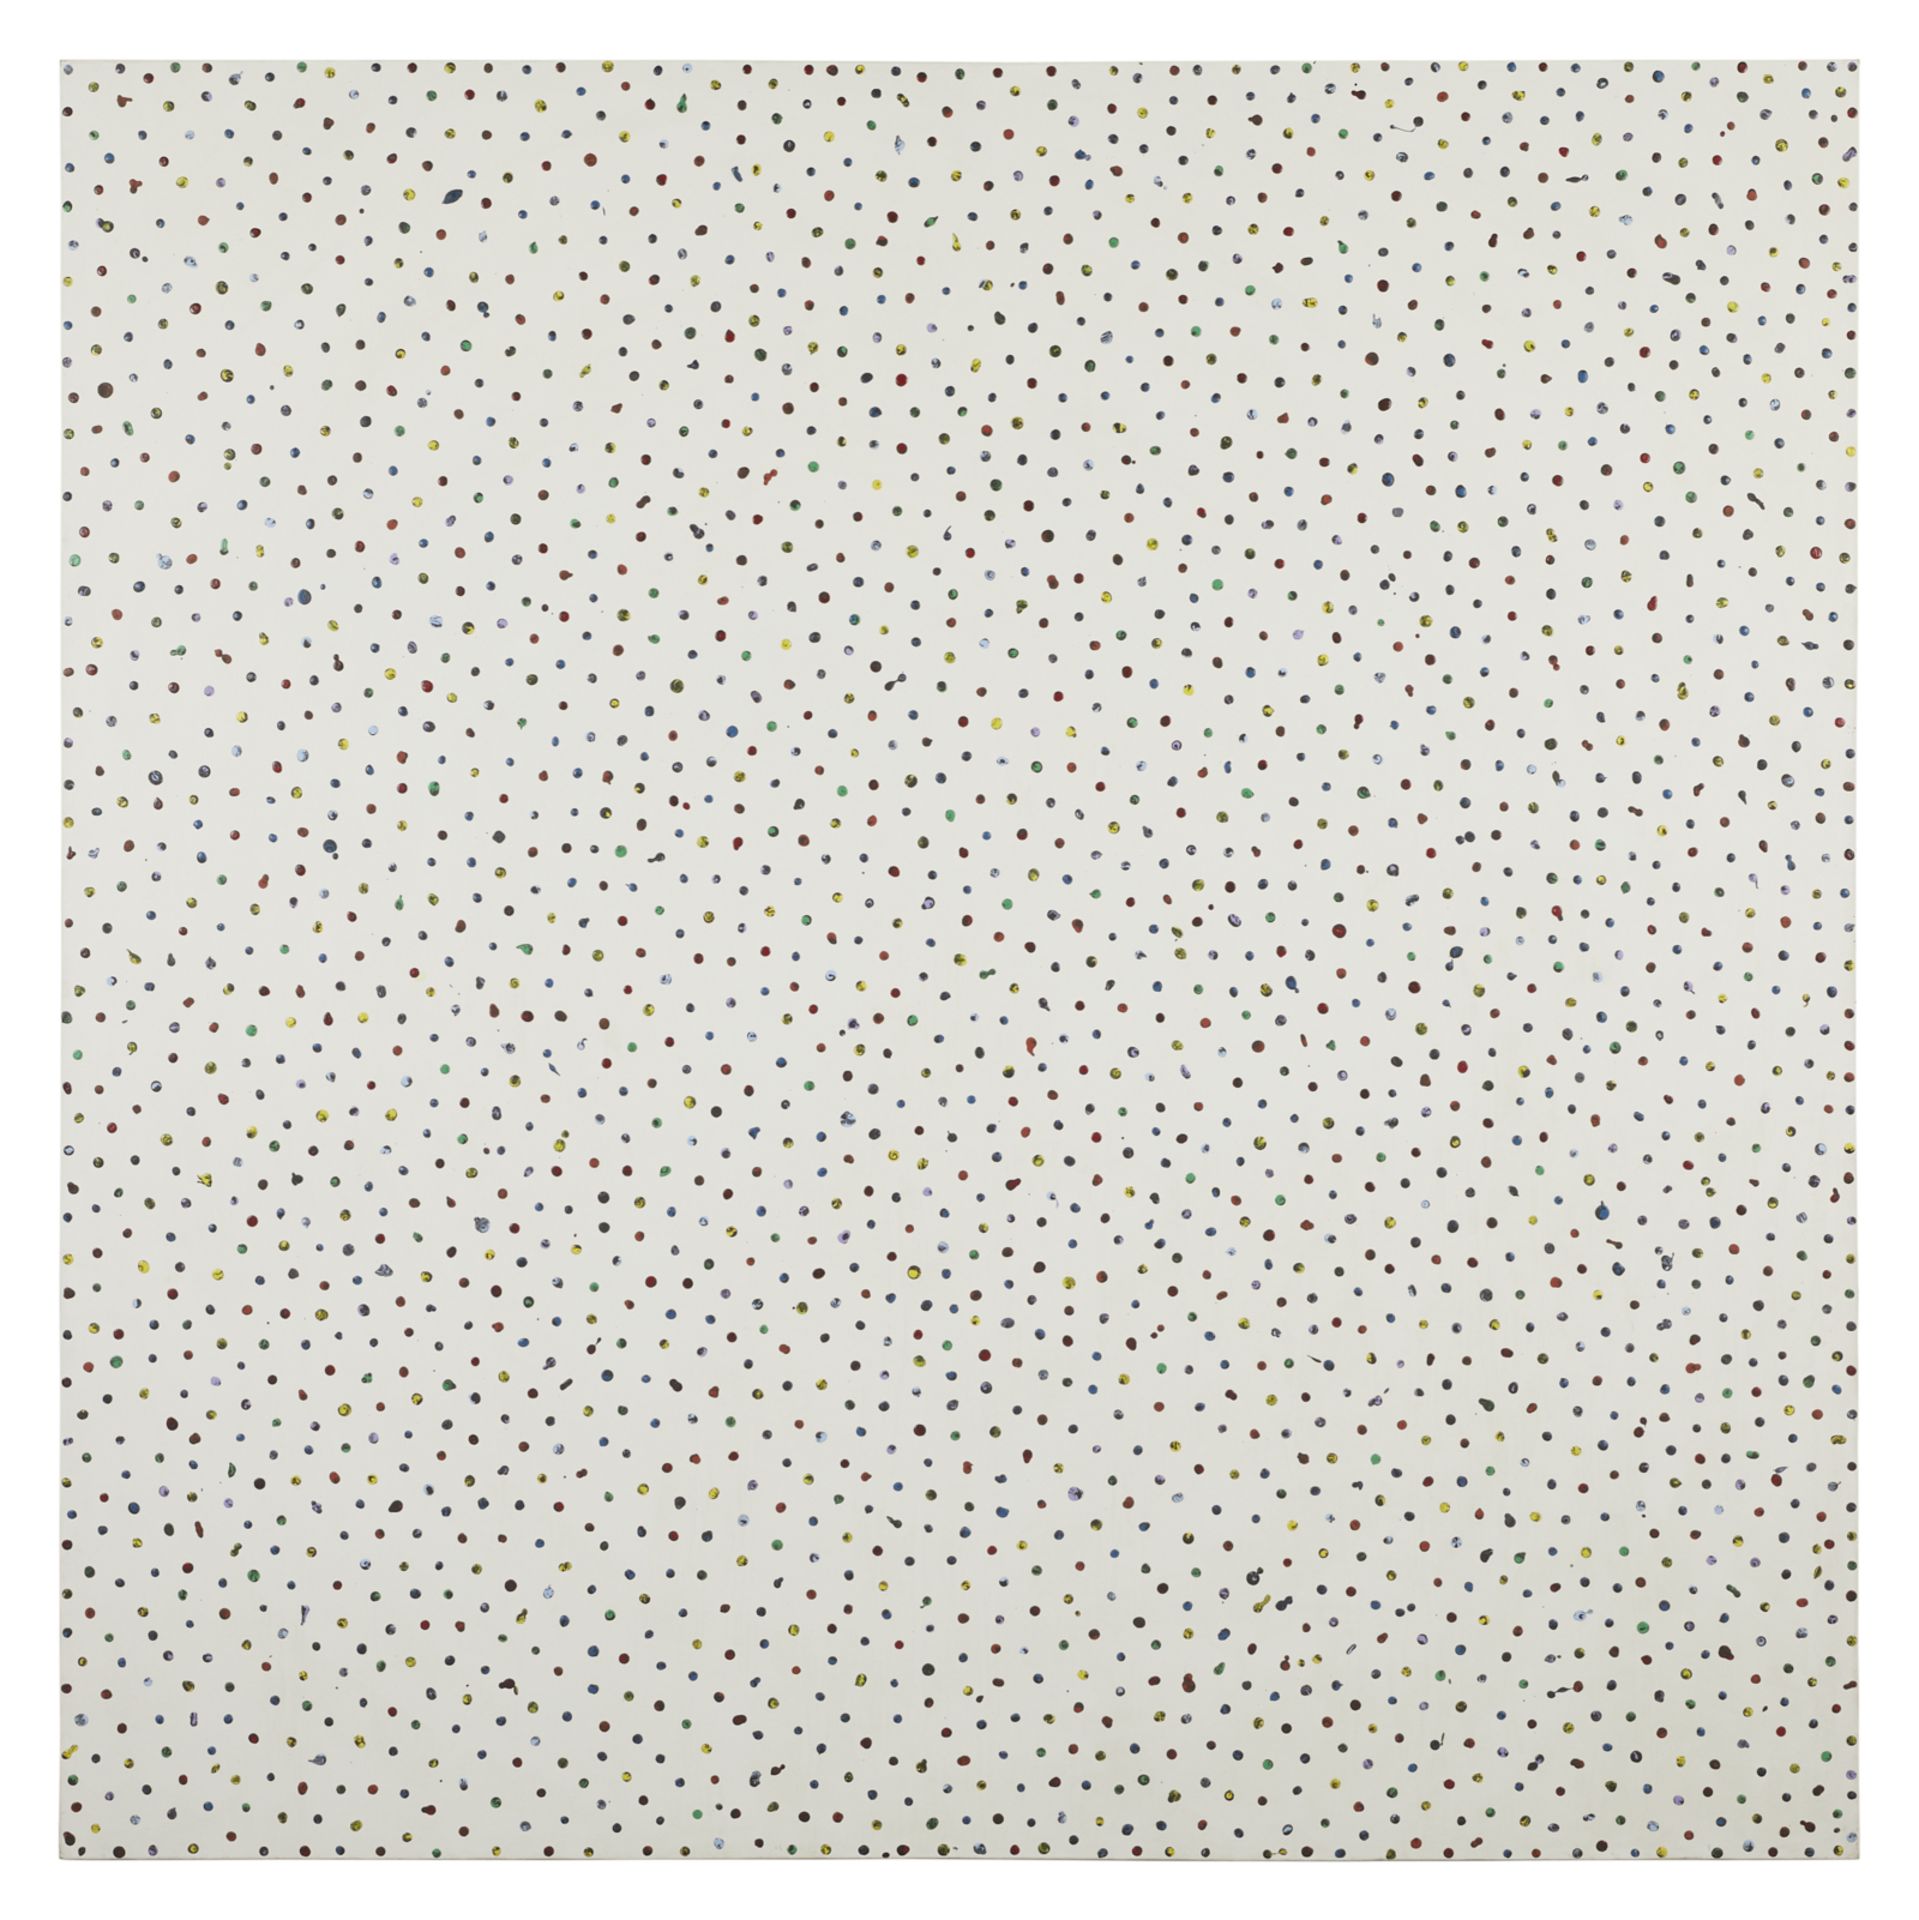 Large Peter Young "White Painting #10" 1967 - Image 3 of 10